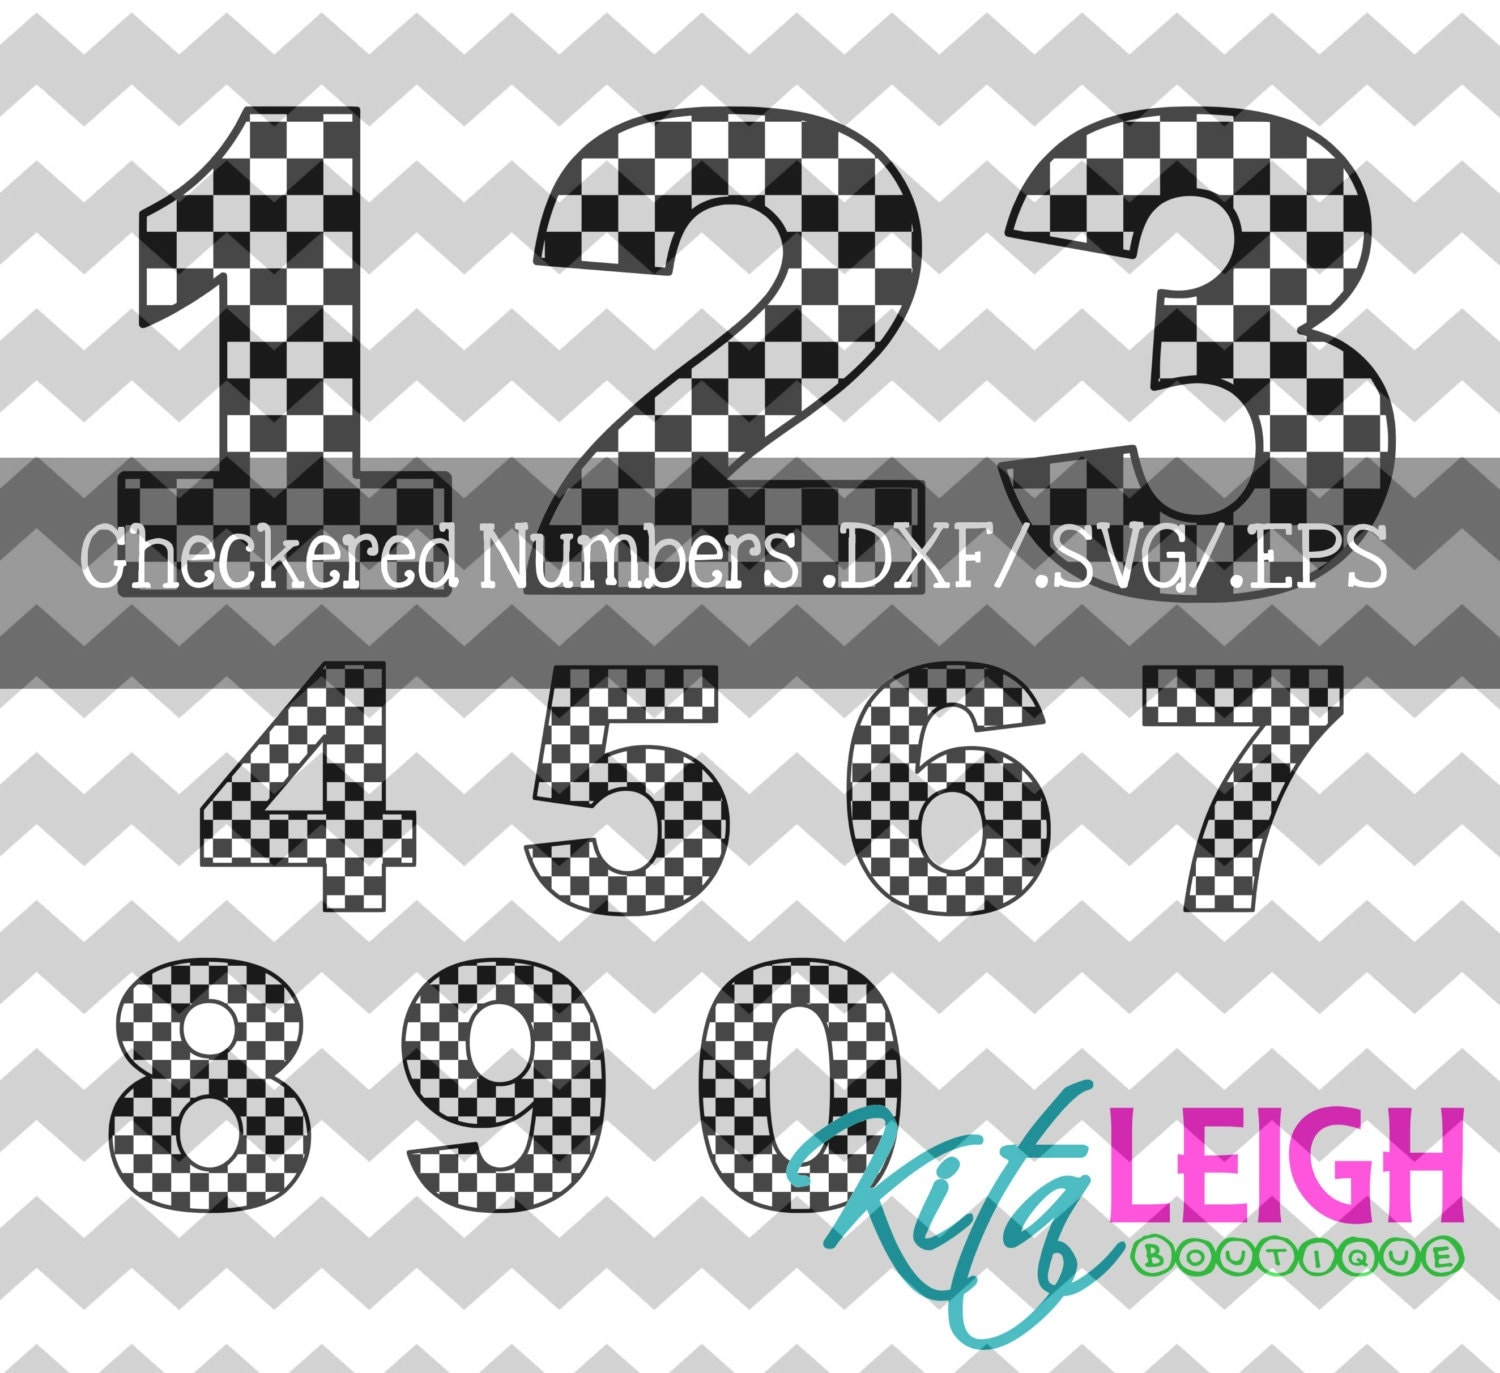 Checkered Numbers DXF SVG EPS File For Use With Your